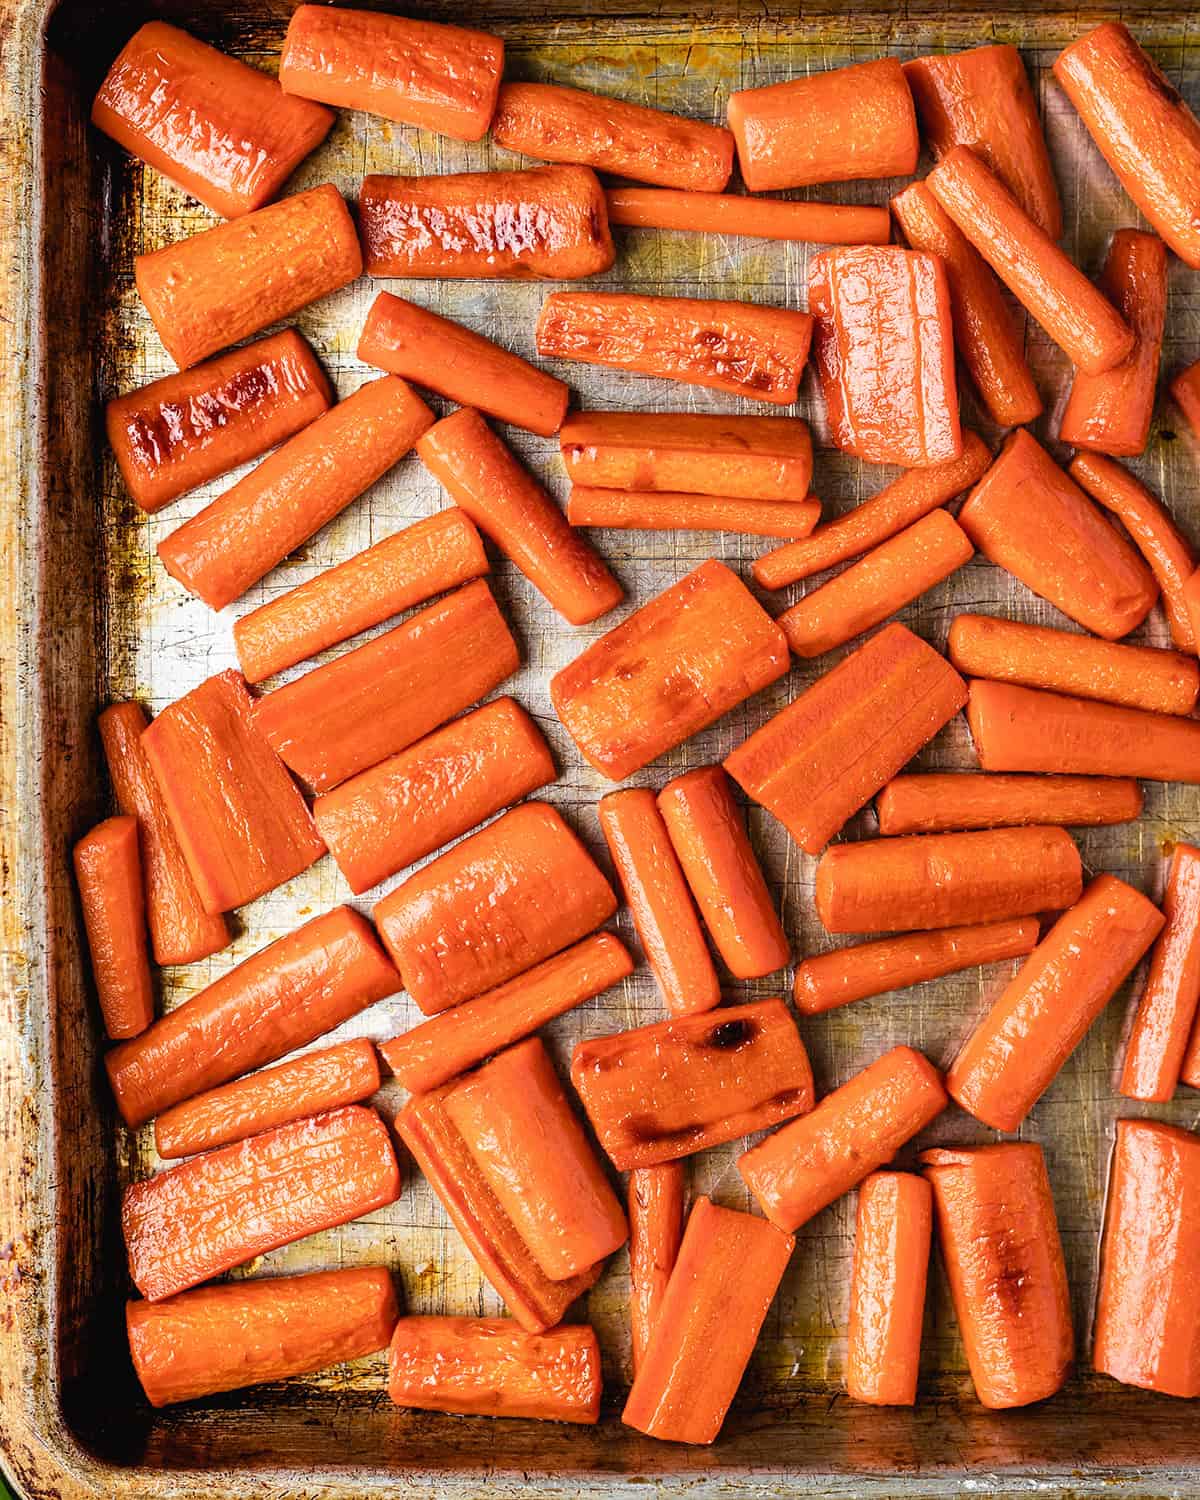 How to Make Baby Food Carrots  - carrots on a baking sheet after roasting